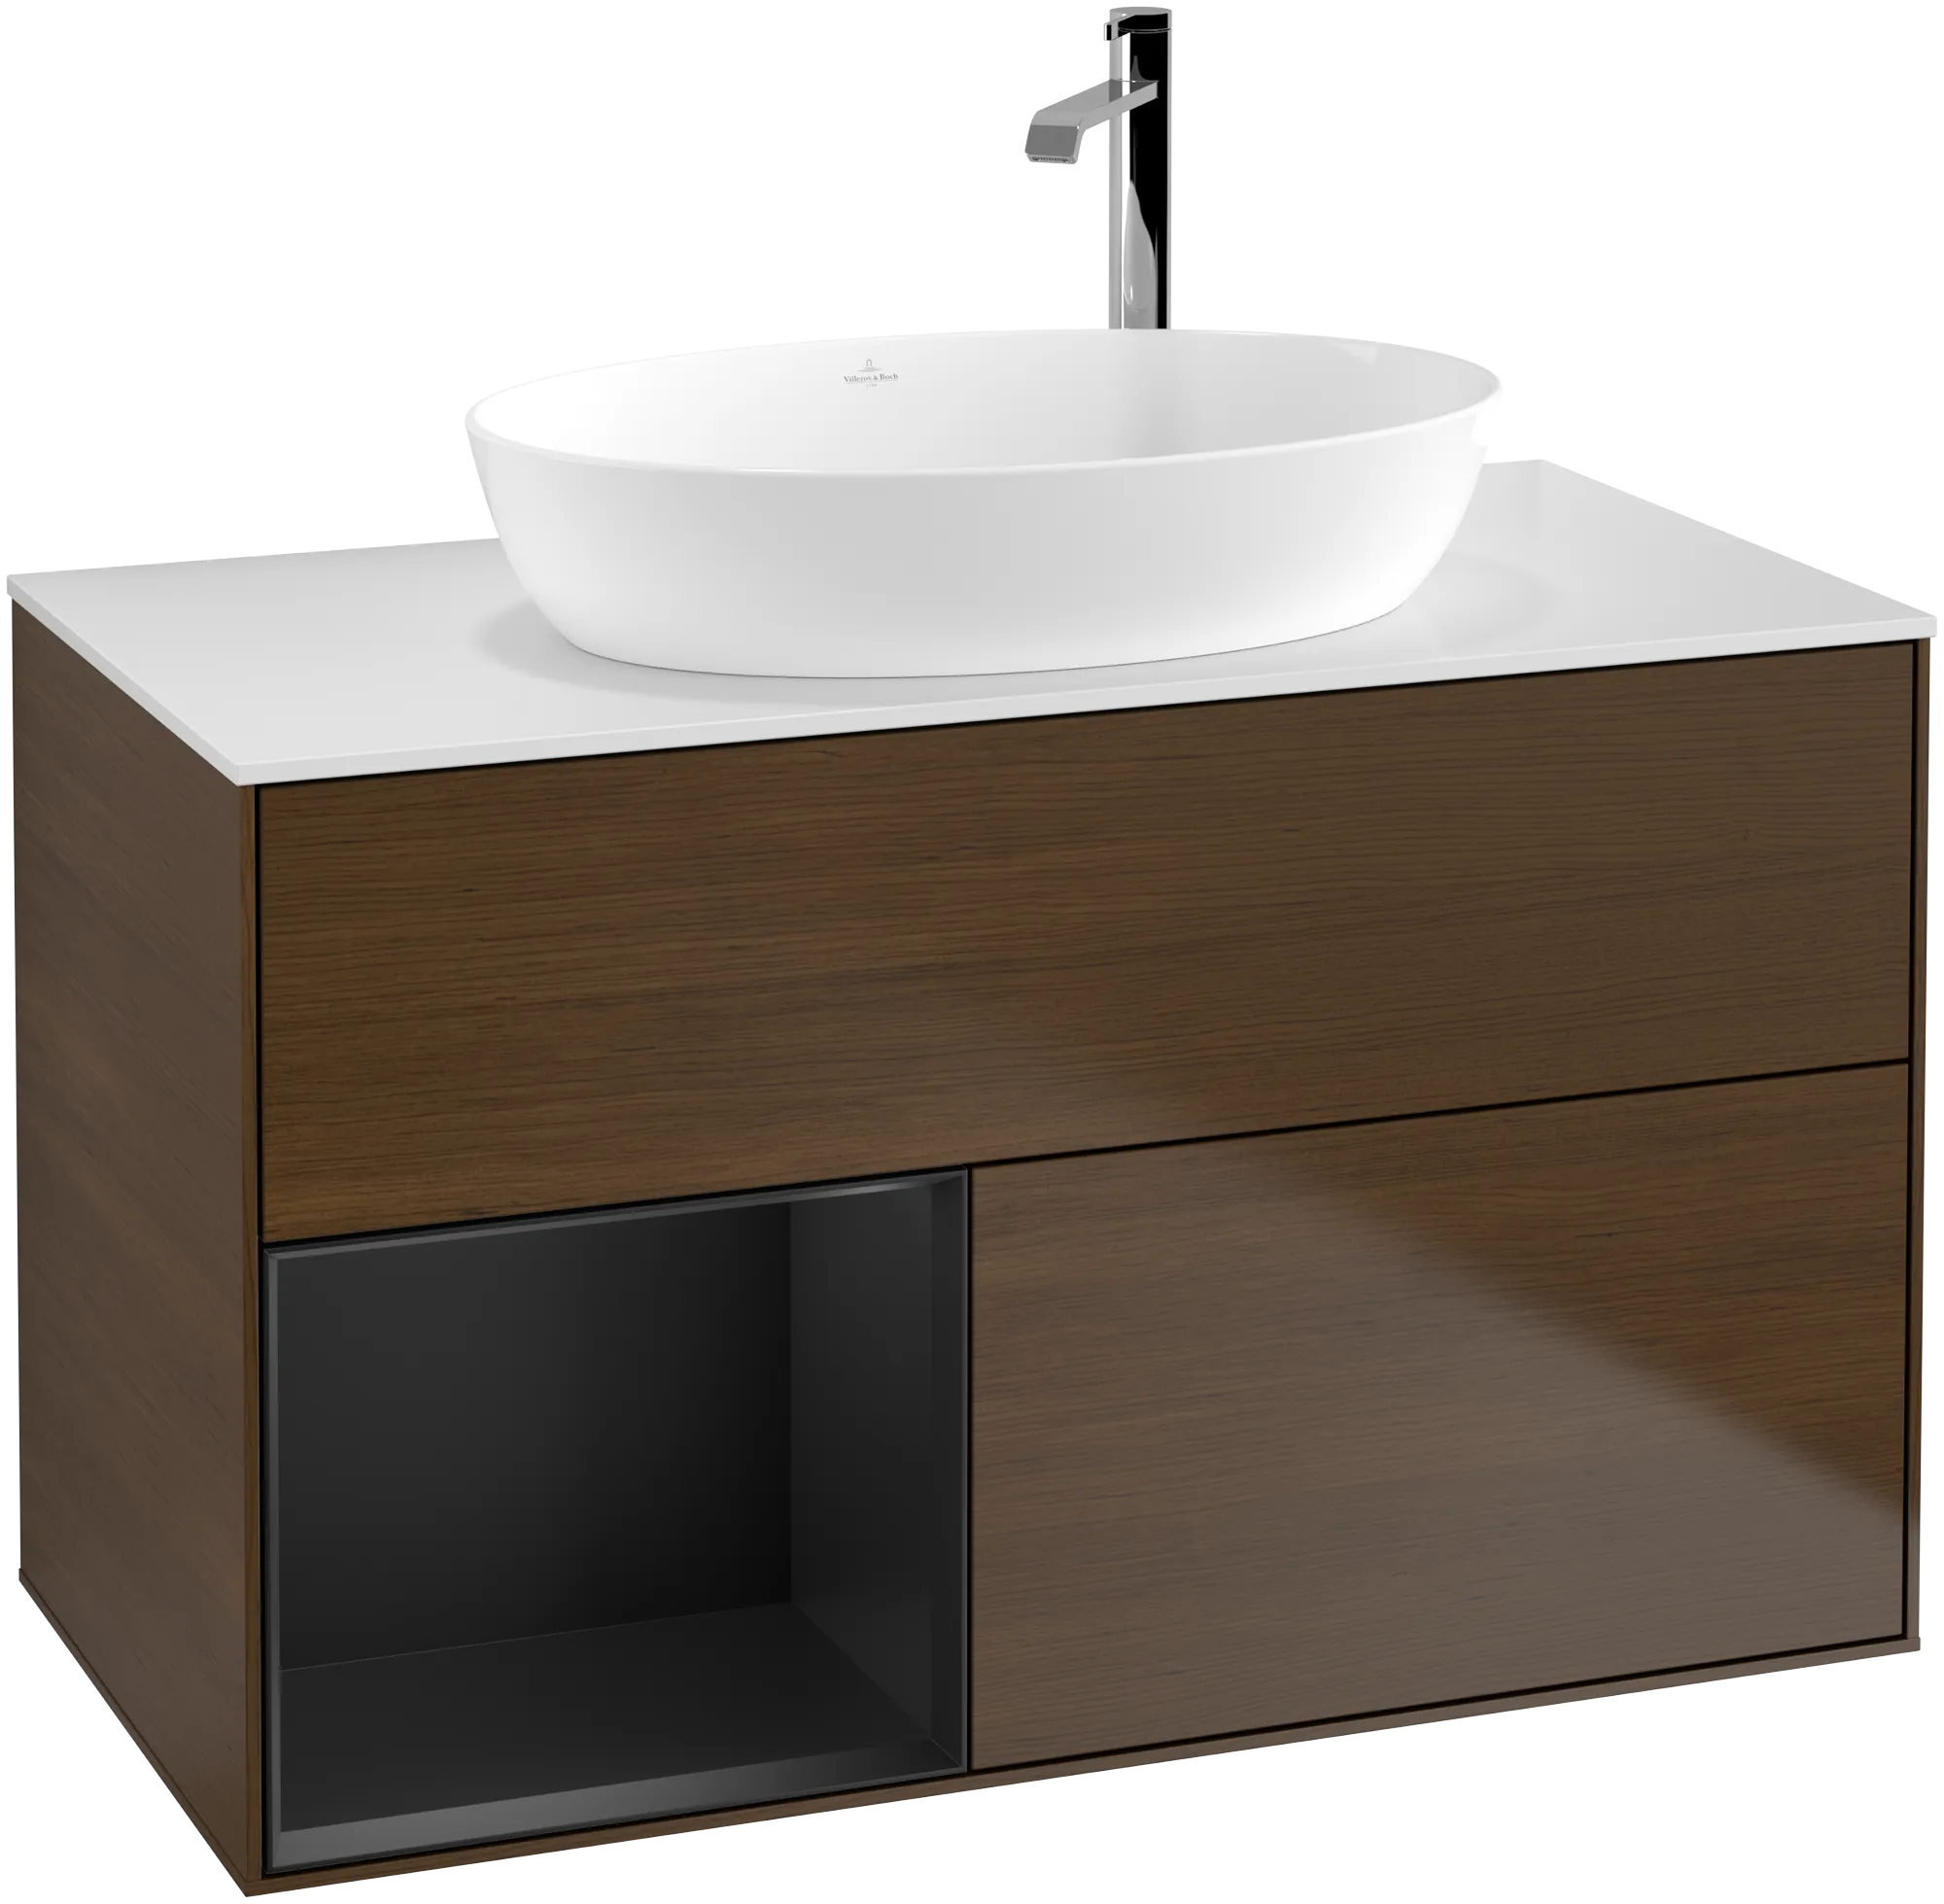 Picture of VILLEROY BOCH Finion Vanity unit, with lighting, 2 pull-out compartments, 1000 x 603 x 501 mm, Walnut Veneer / Black Matt Lacquer / Glass White Matt #G891PDGN